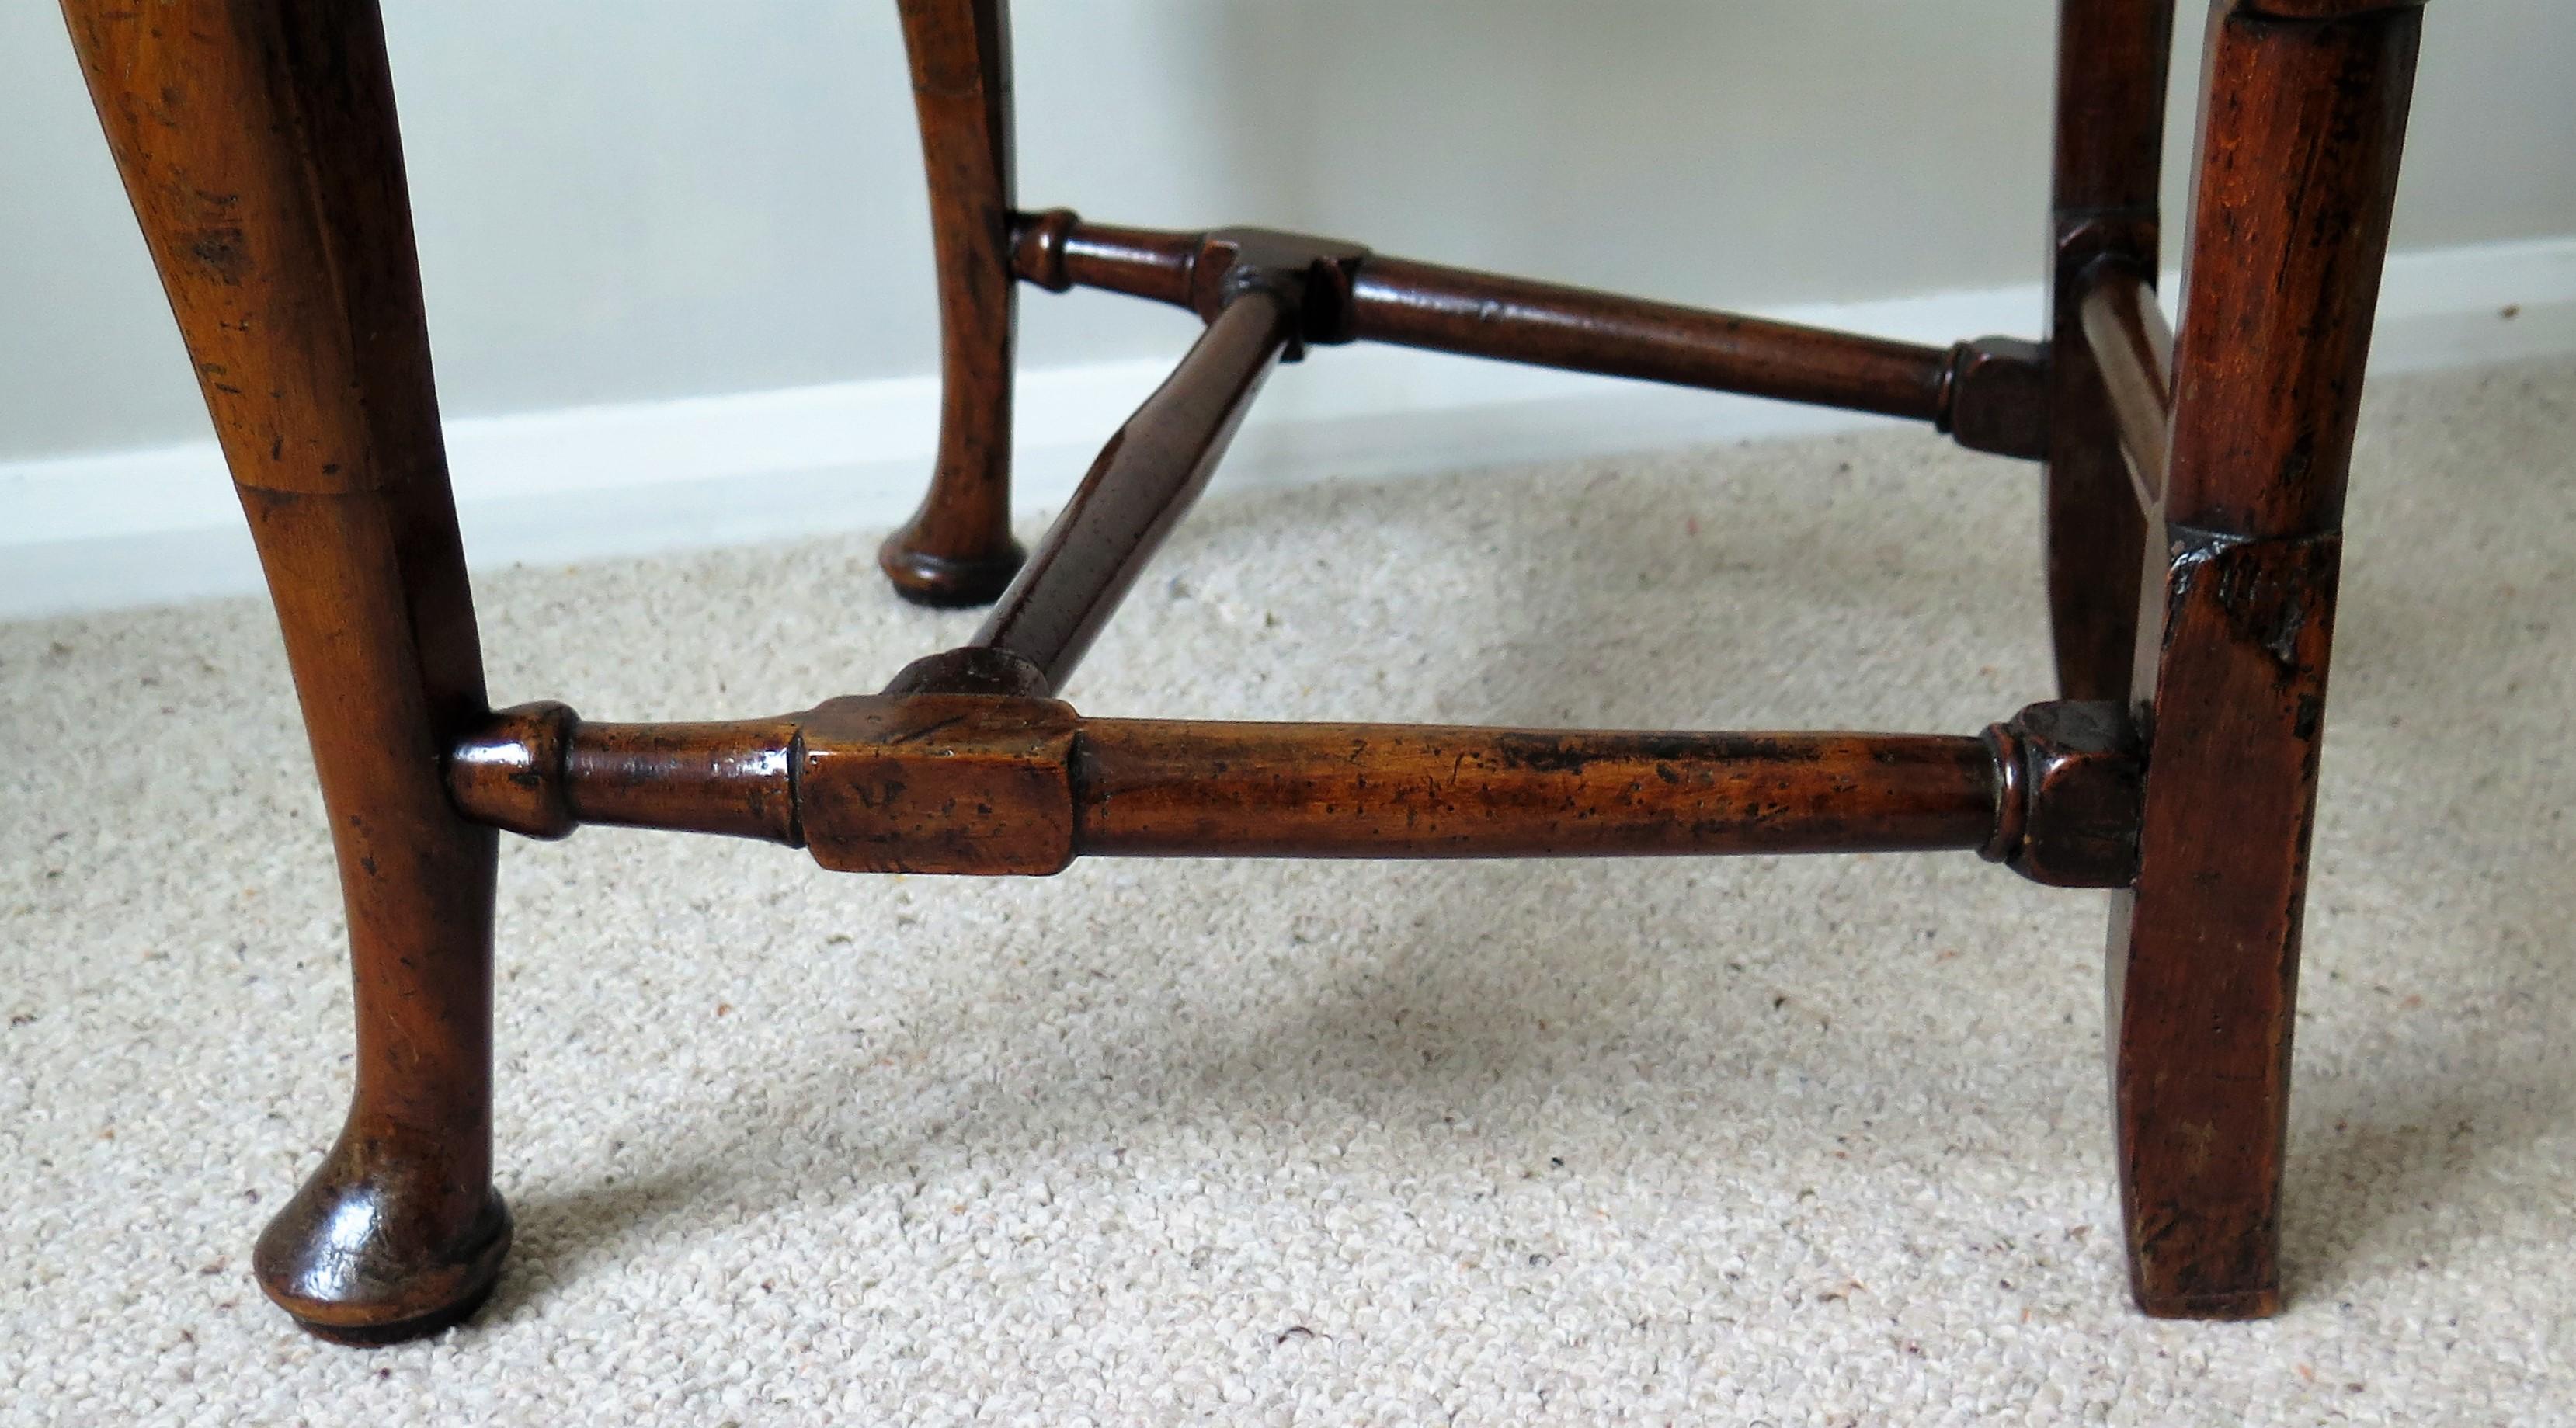 Queen Anne Period Walnut Chair Cabriole Legs and Stretchers, English circa 1700 For Sale 8